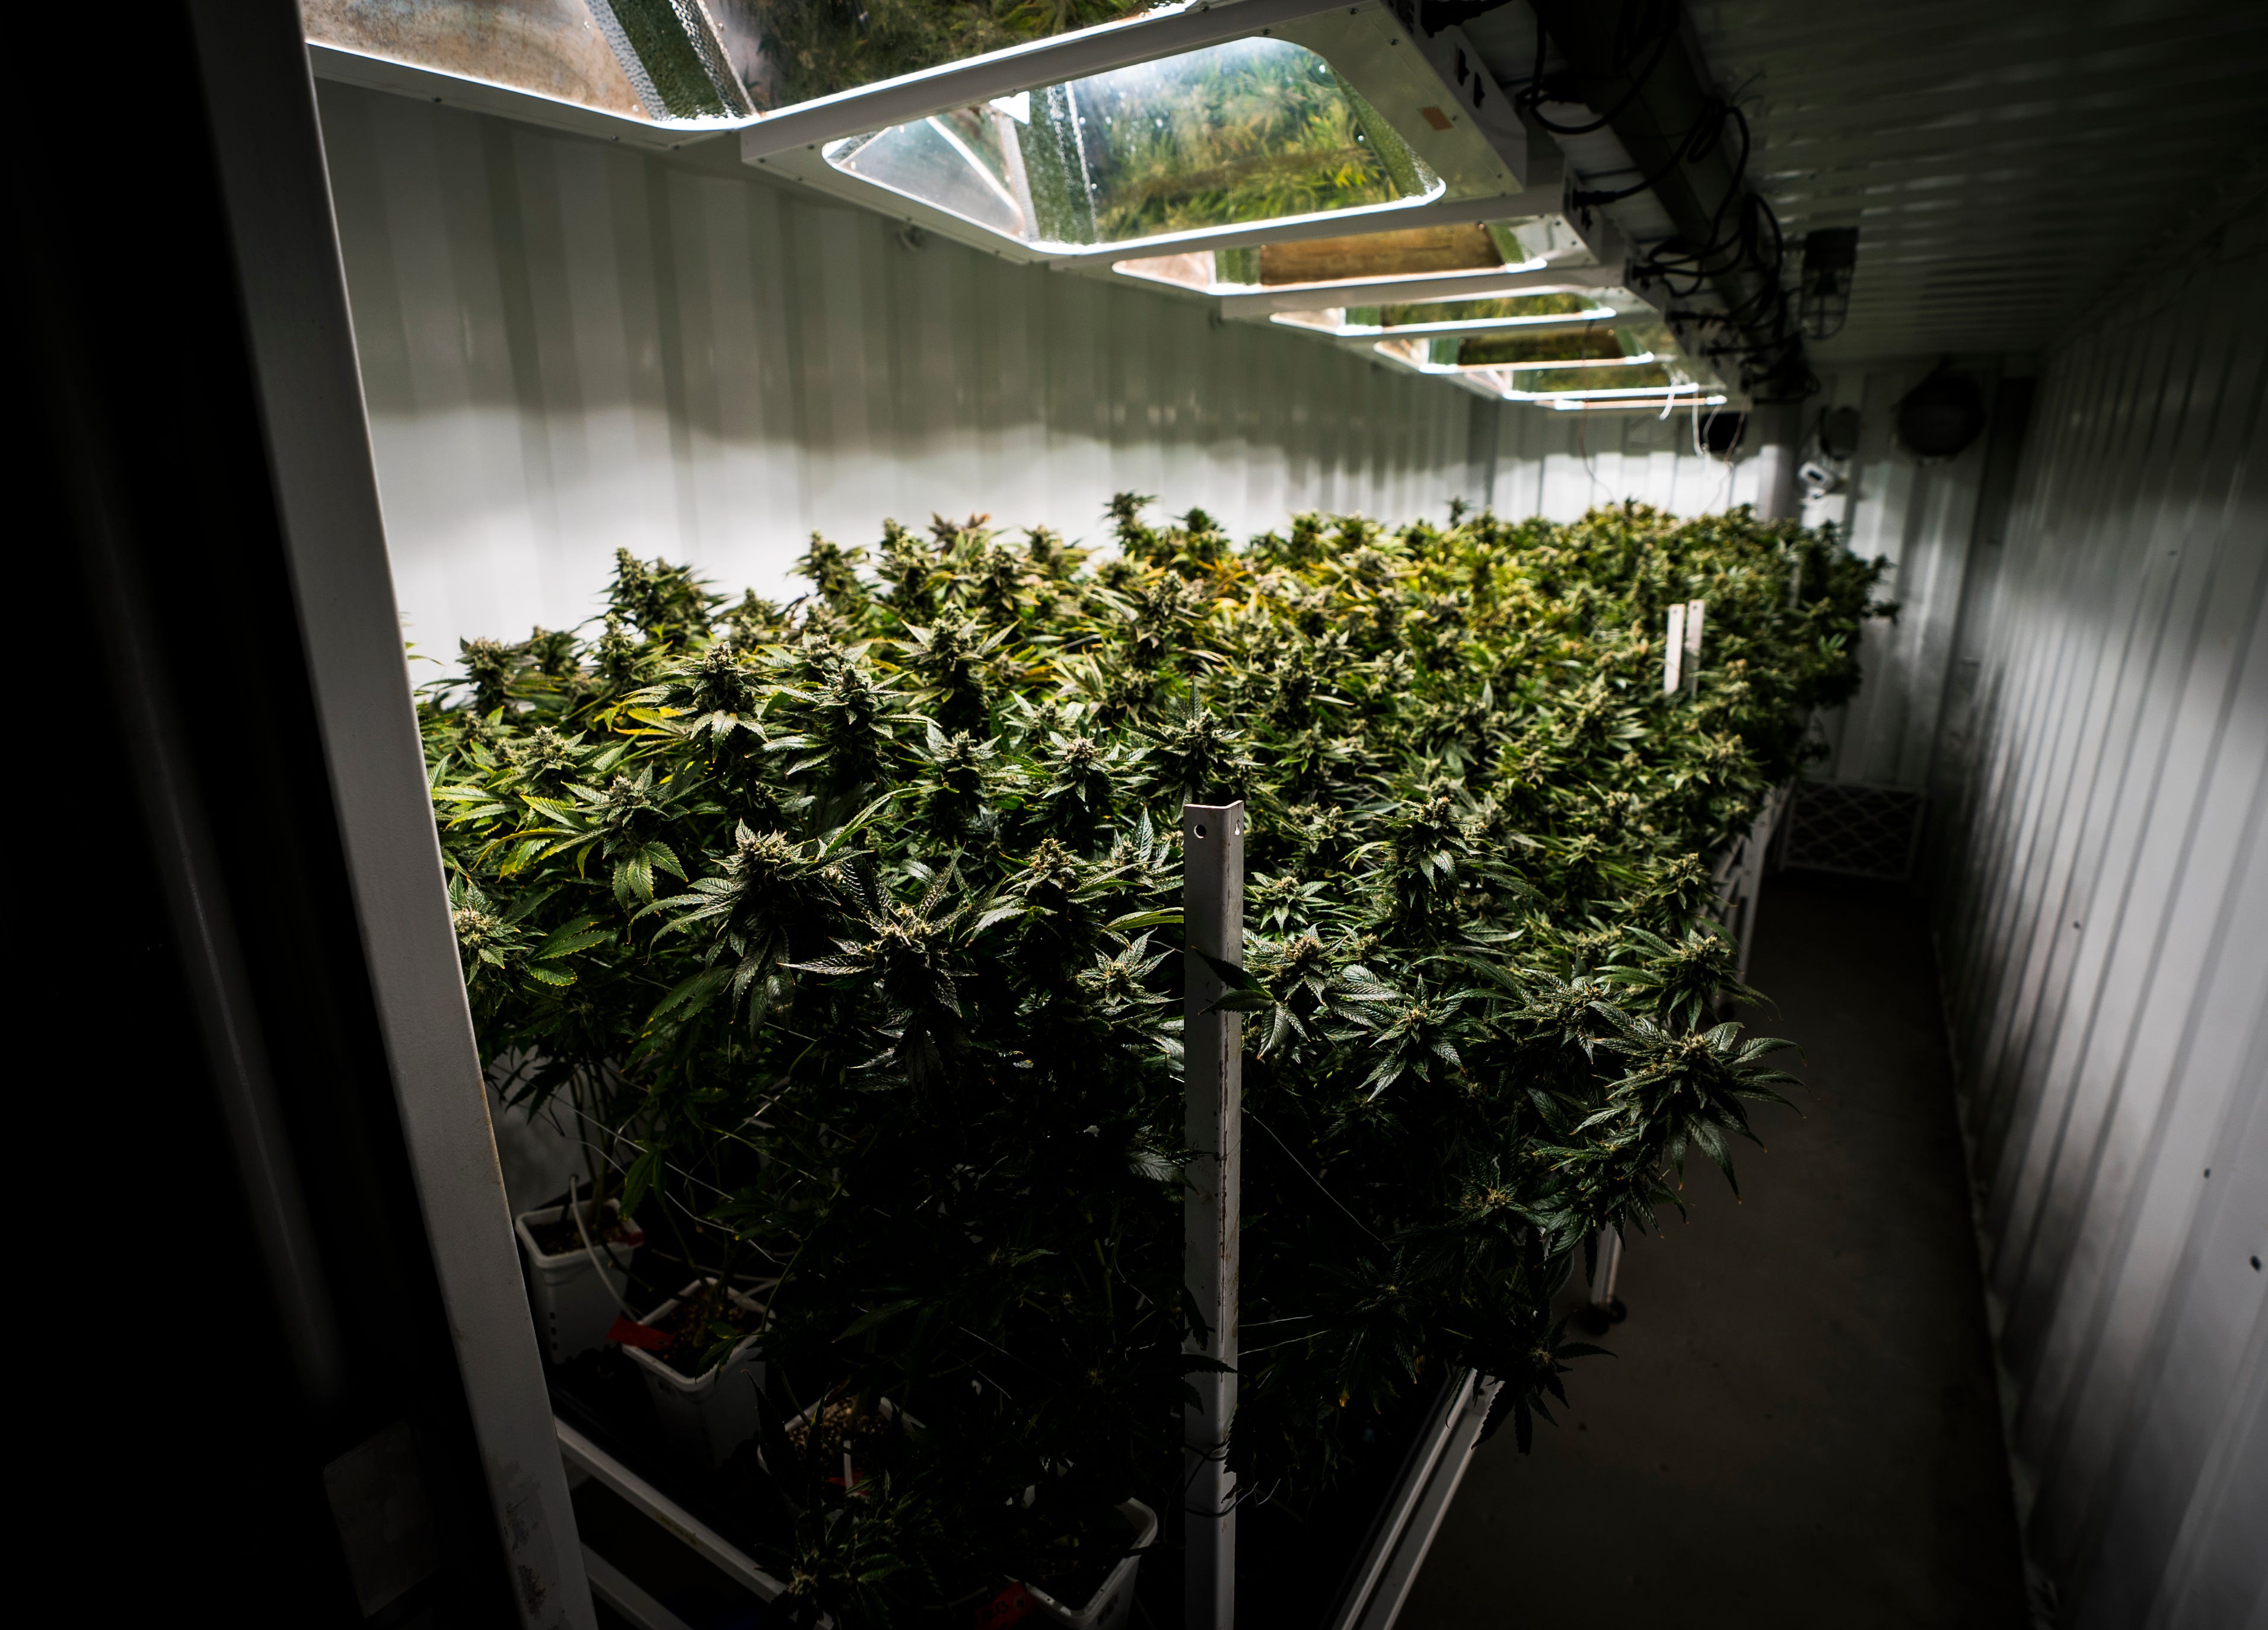 A look inside one of the fully-functioning grow pods at CVD, Inc. in Milton, Vt., on Tuesday, March 19, 2019. The hydroponic-equipped steel structures grow the facility's medical marijuana and house grow lights, irrigation and ventilation systems for quick growth.